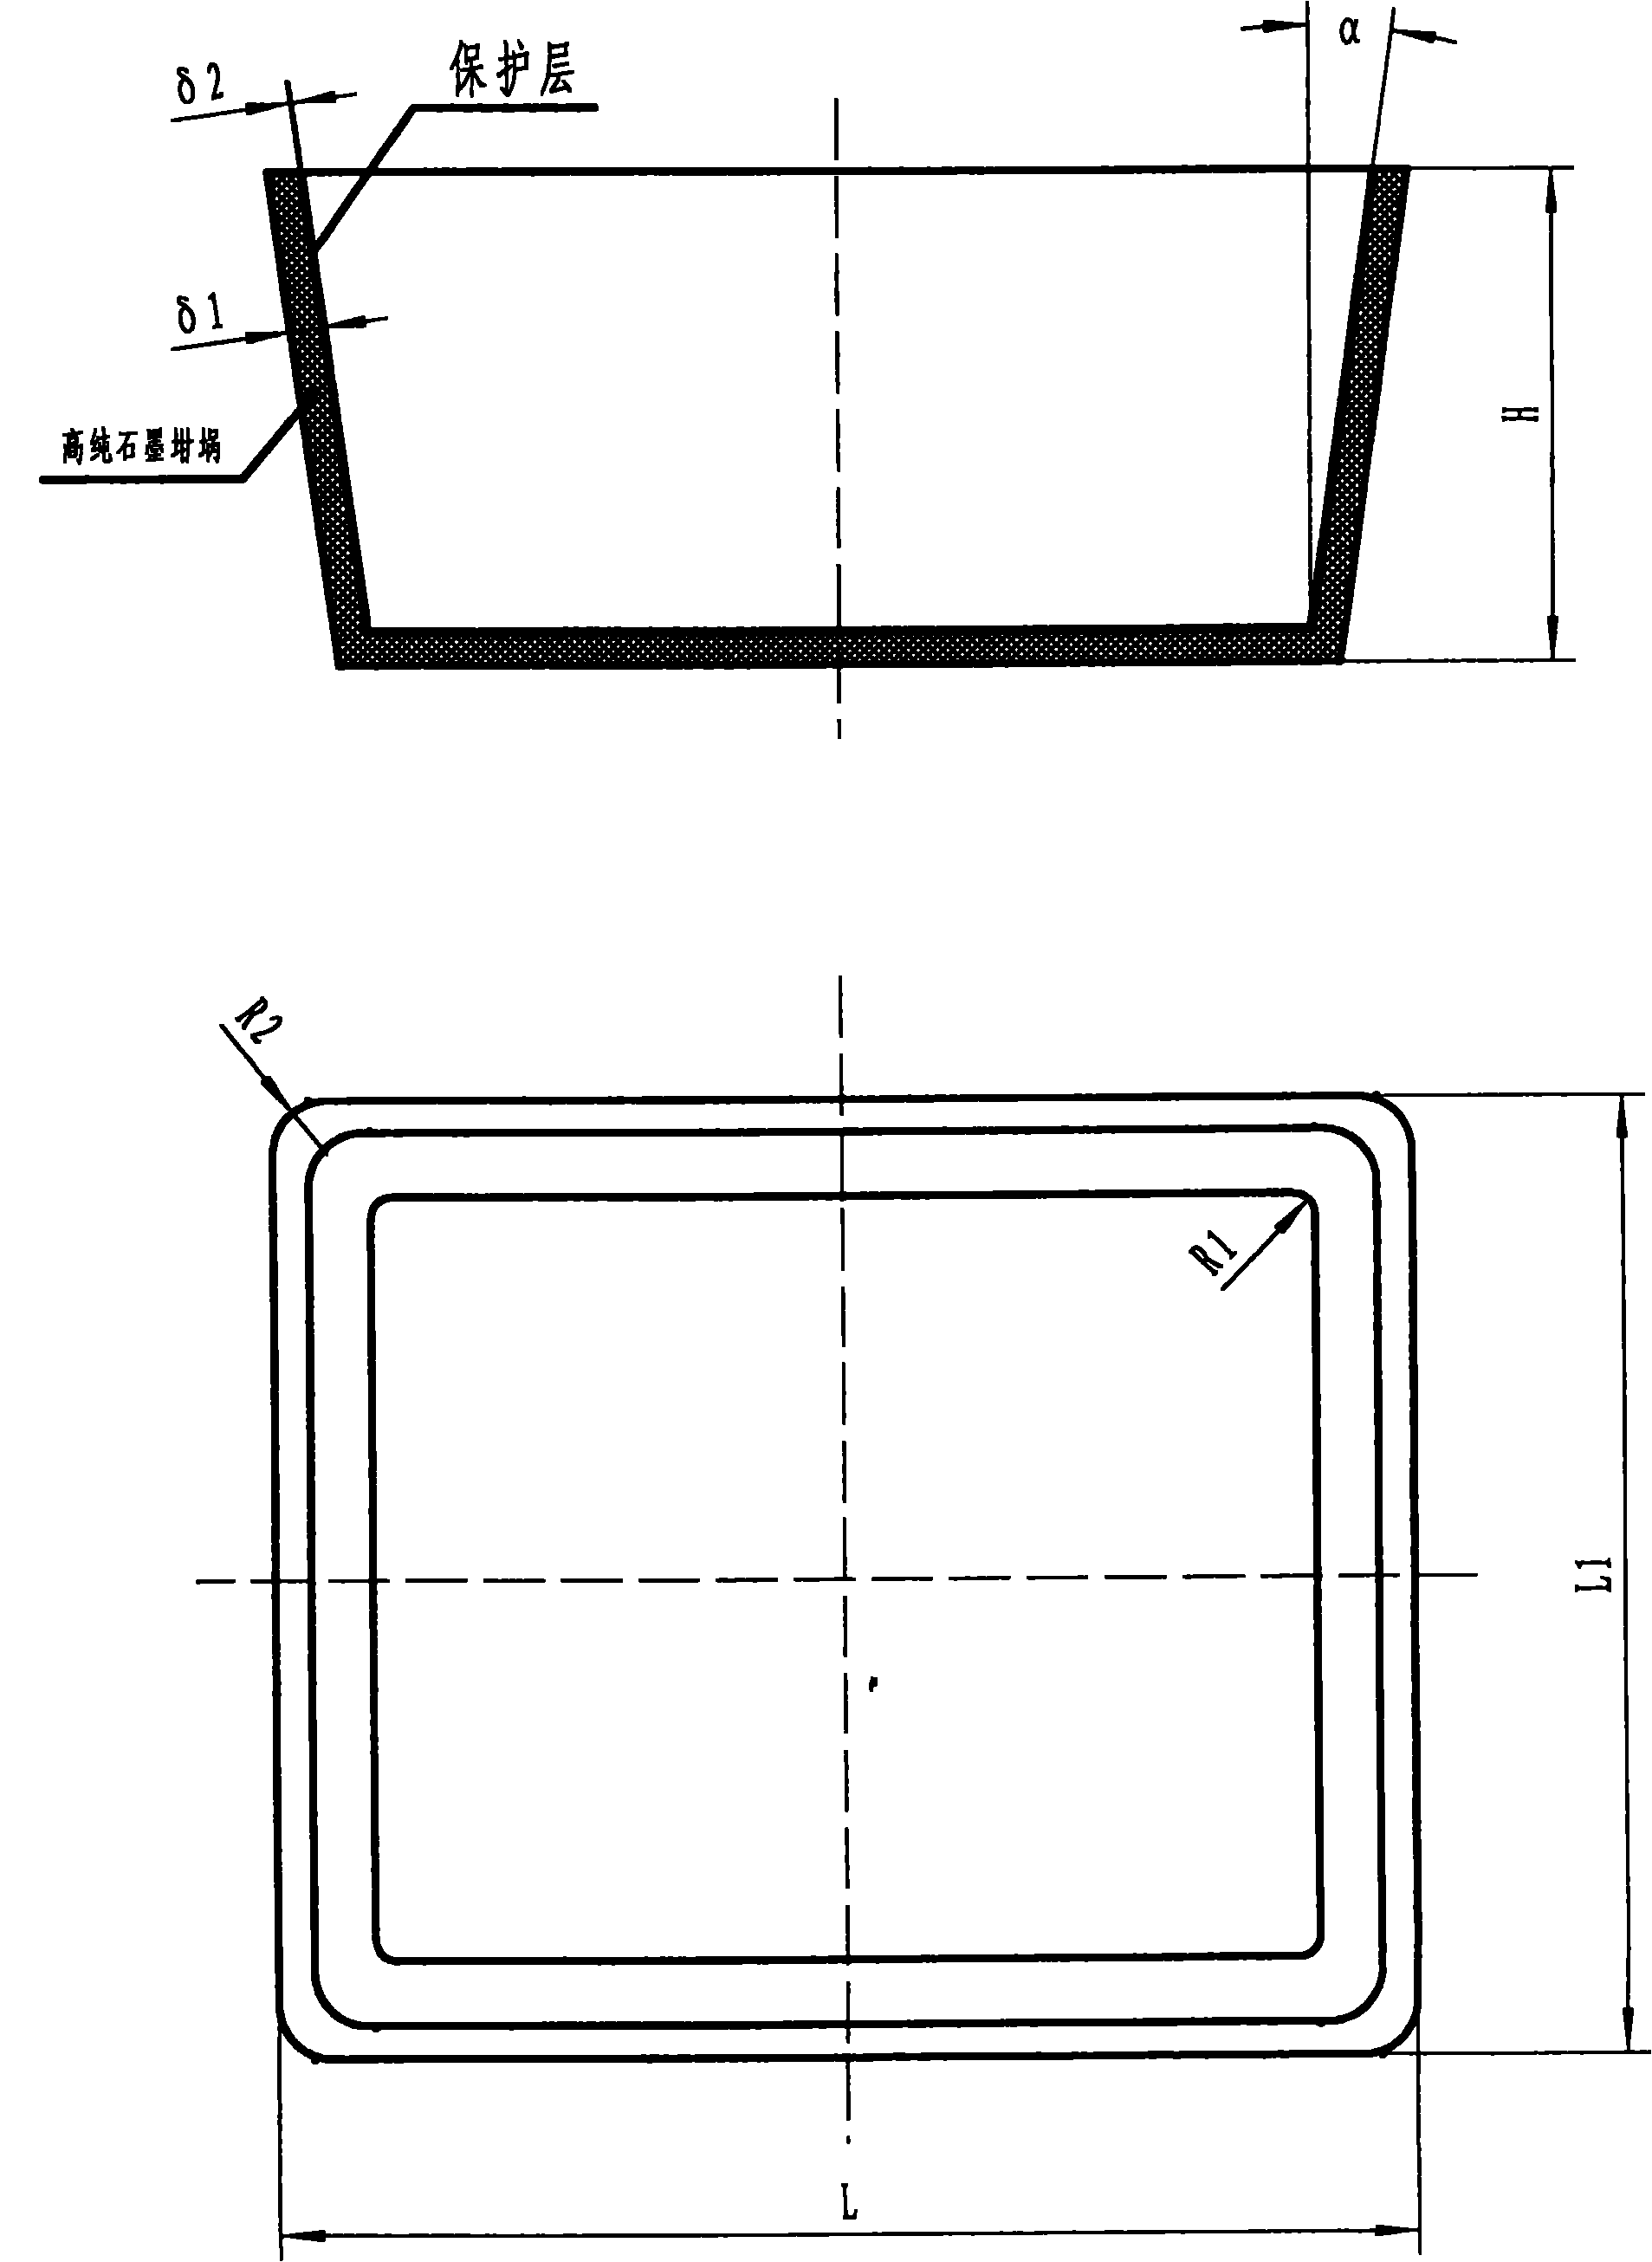 Crucible device for polycrystalline silicon growth process